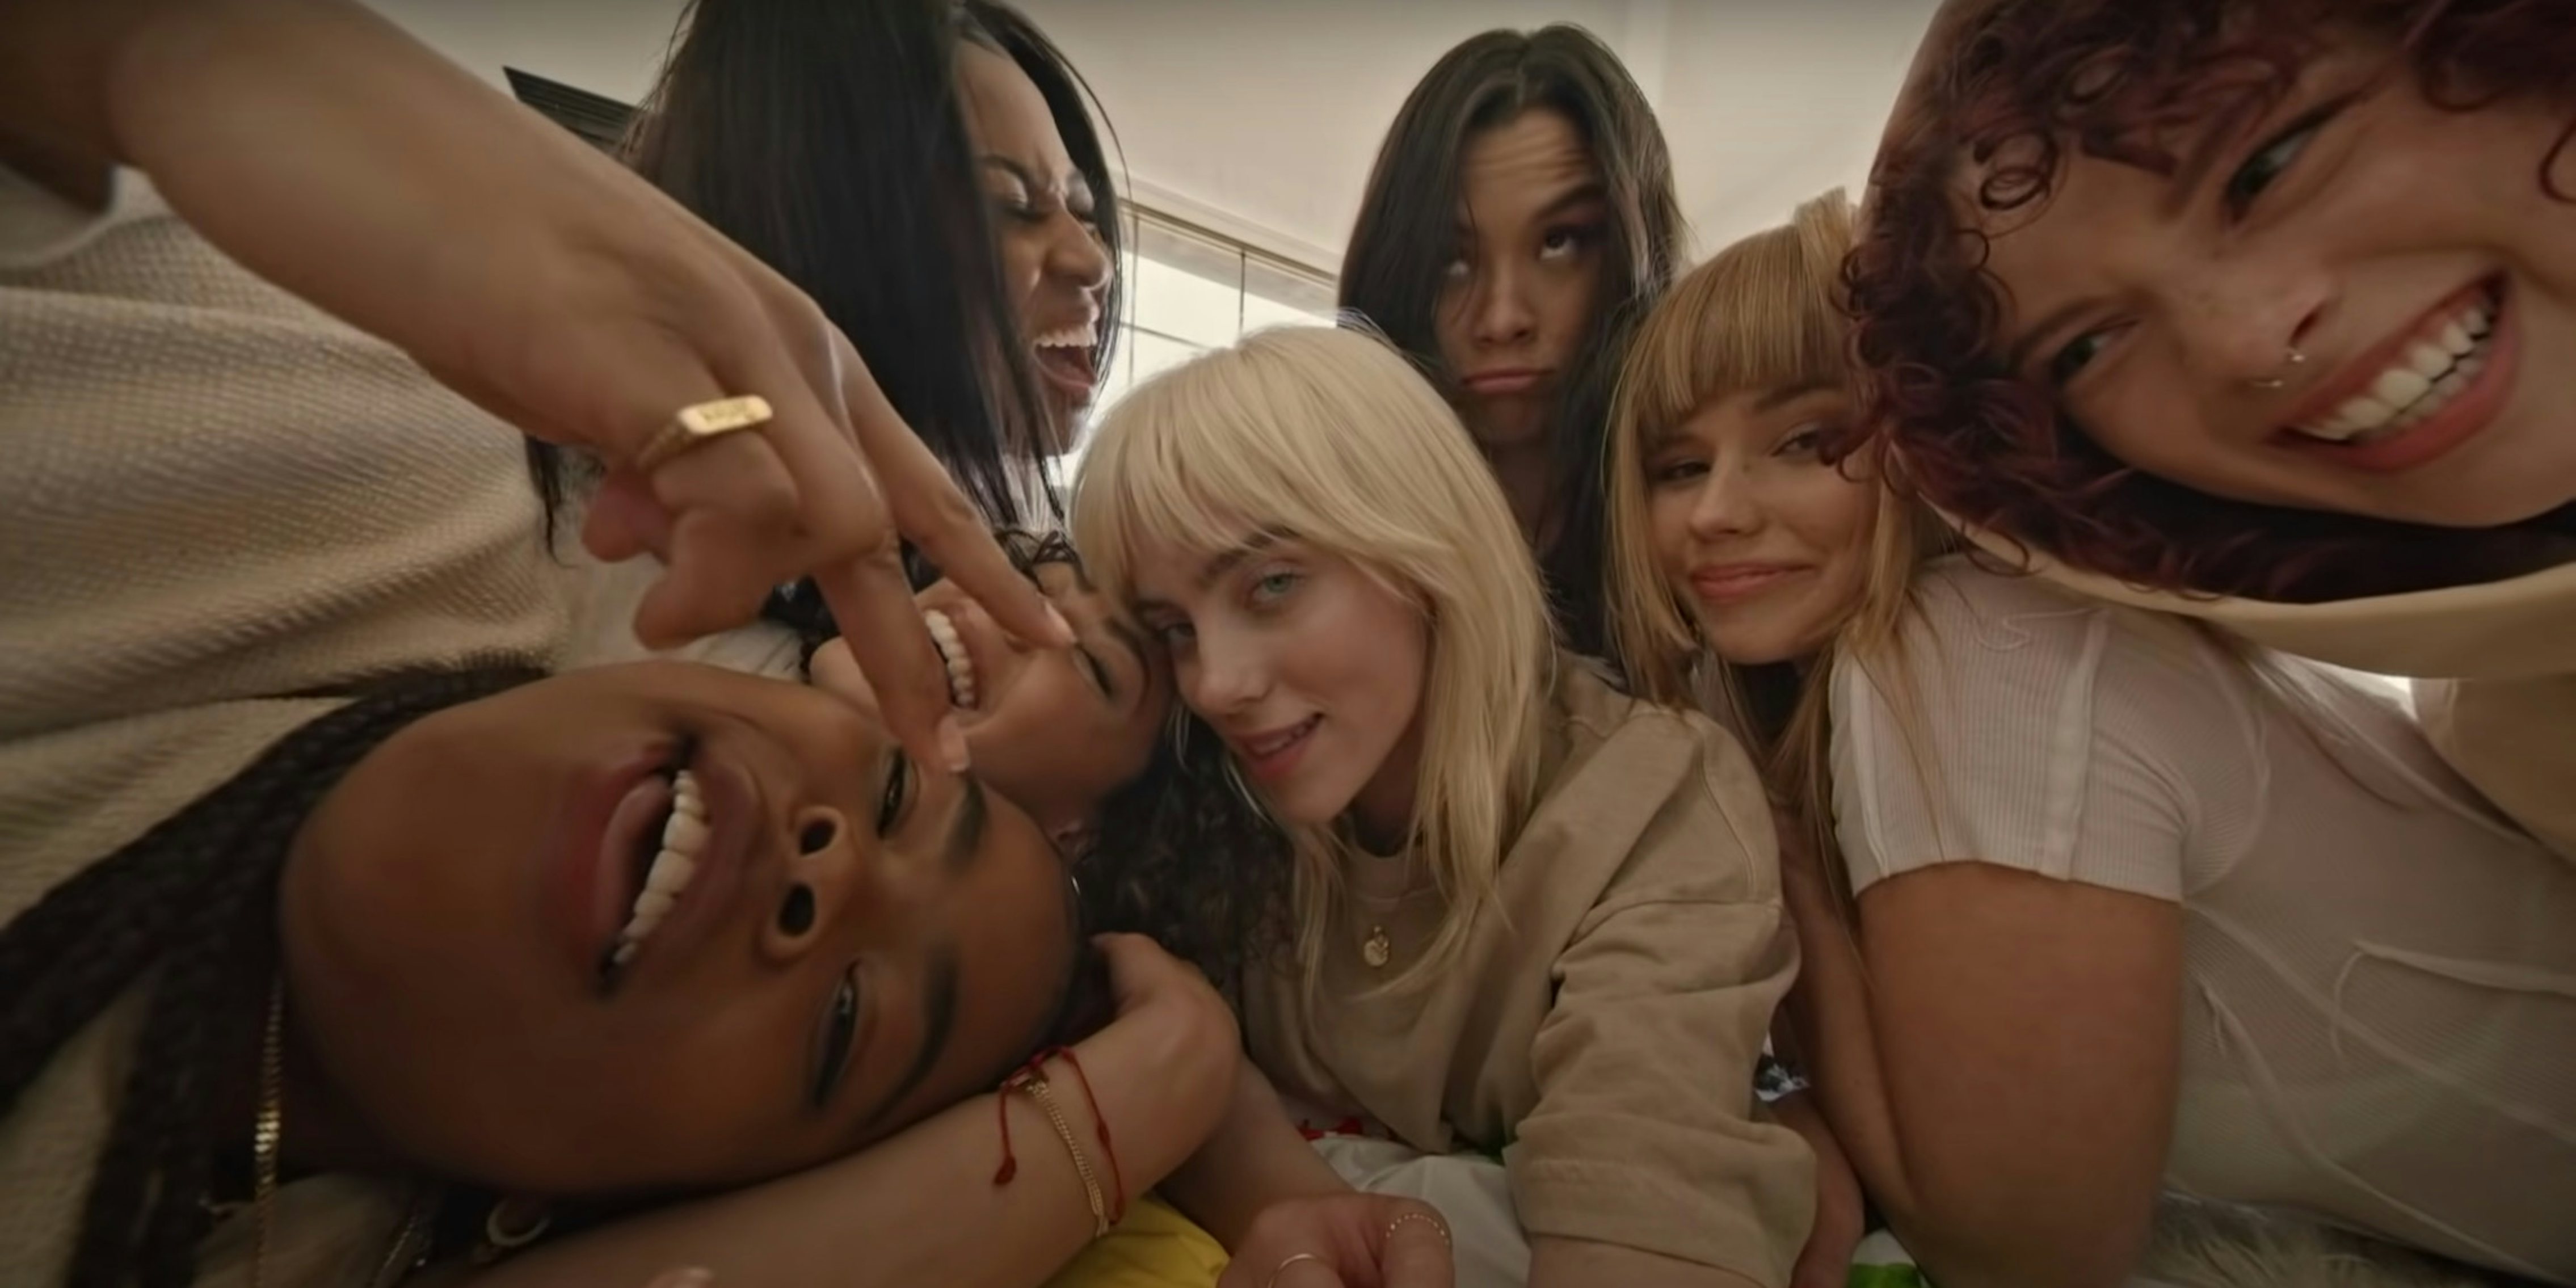 billie eilish surrounded by other women